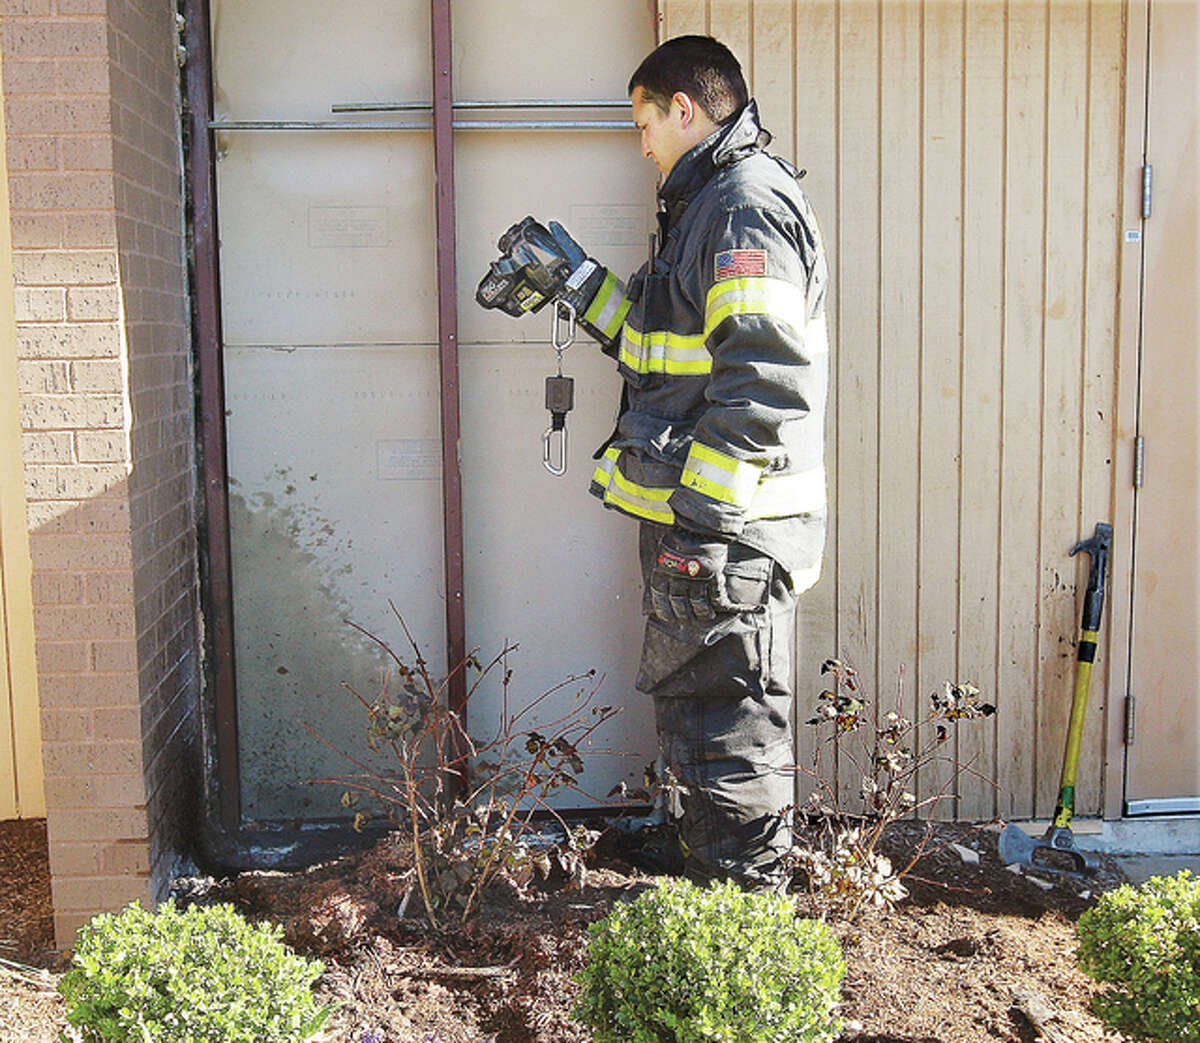 An Alton firefighter uses a thermal imaging camera to check for any hot spots in the wall near the upper level south entrance to Alton Square Thursday after a fire in the mulch traveled up the wall and filled Olga’s Restaurant with smoke, forcing an evacuation of the entire mall. Firefighters tore siding and insulation off the wall to exposure the fire.